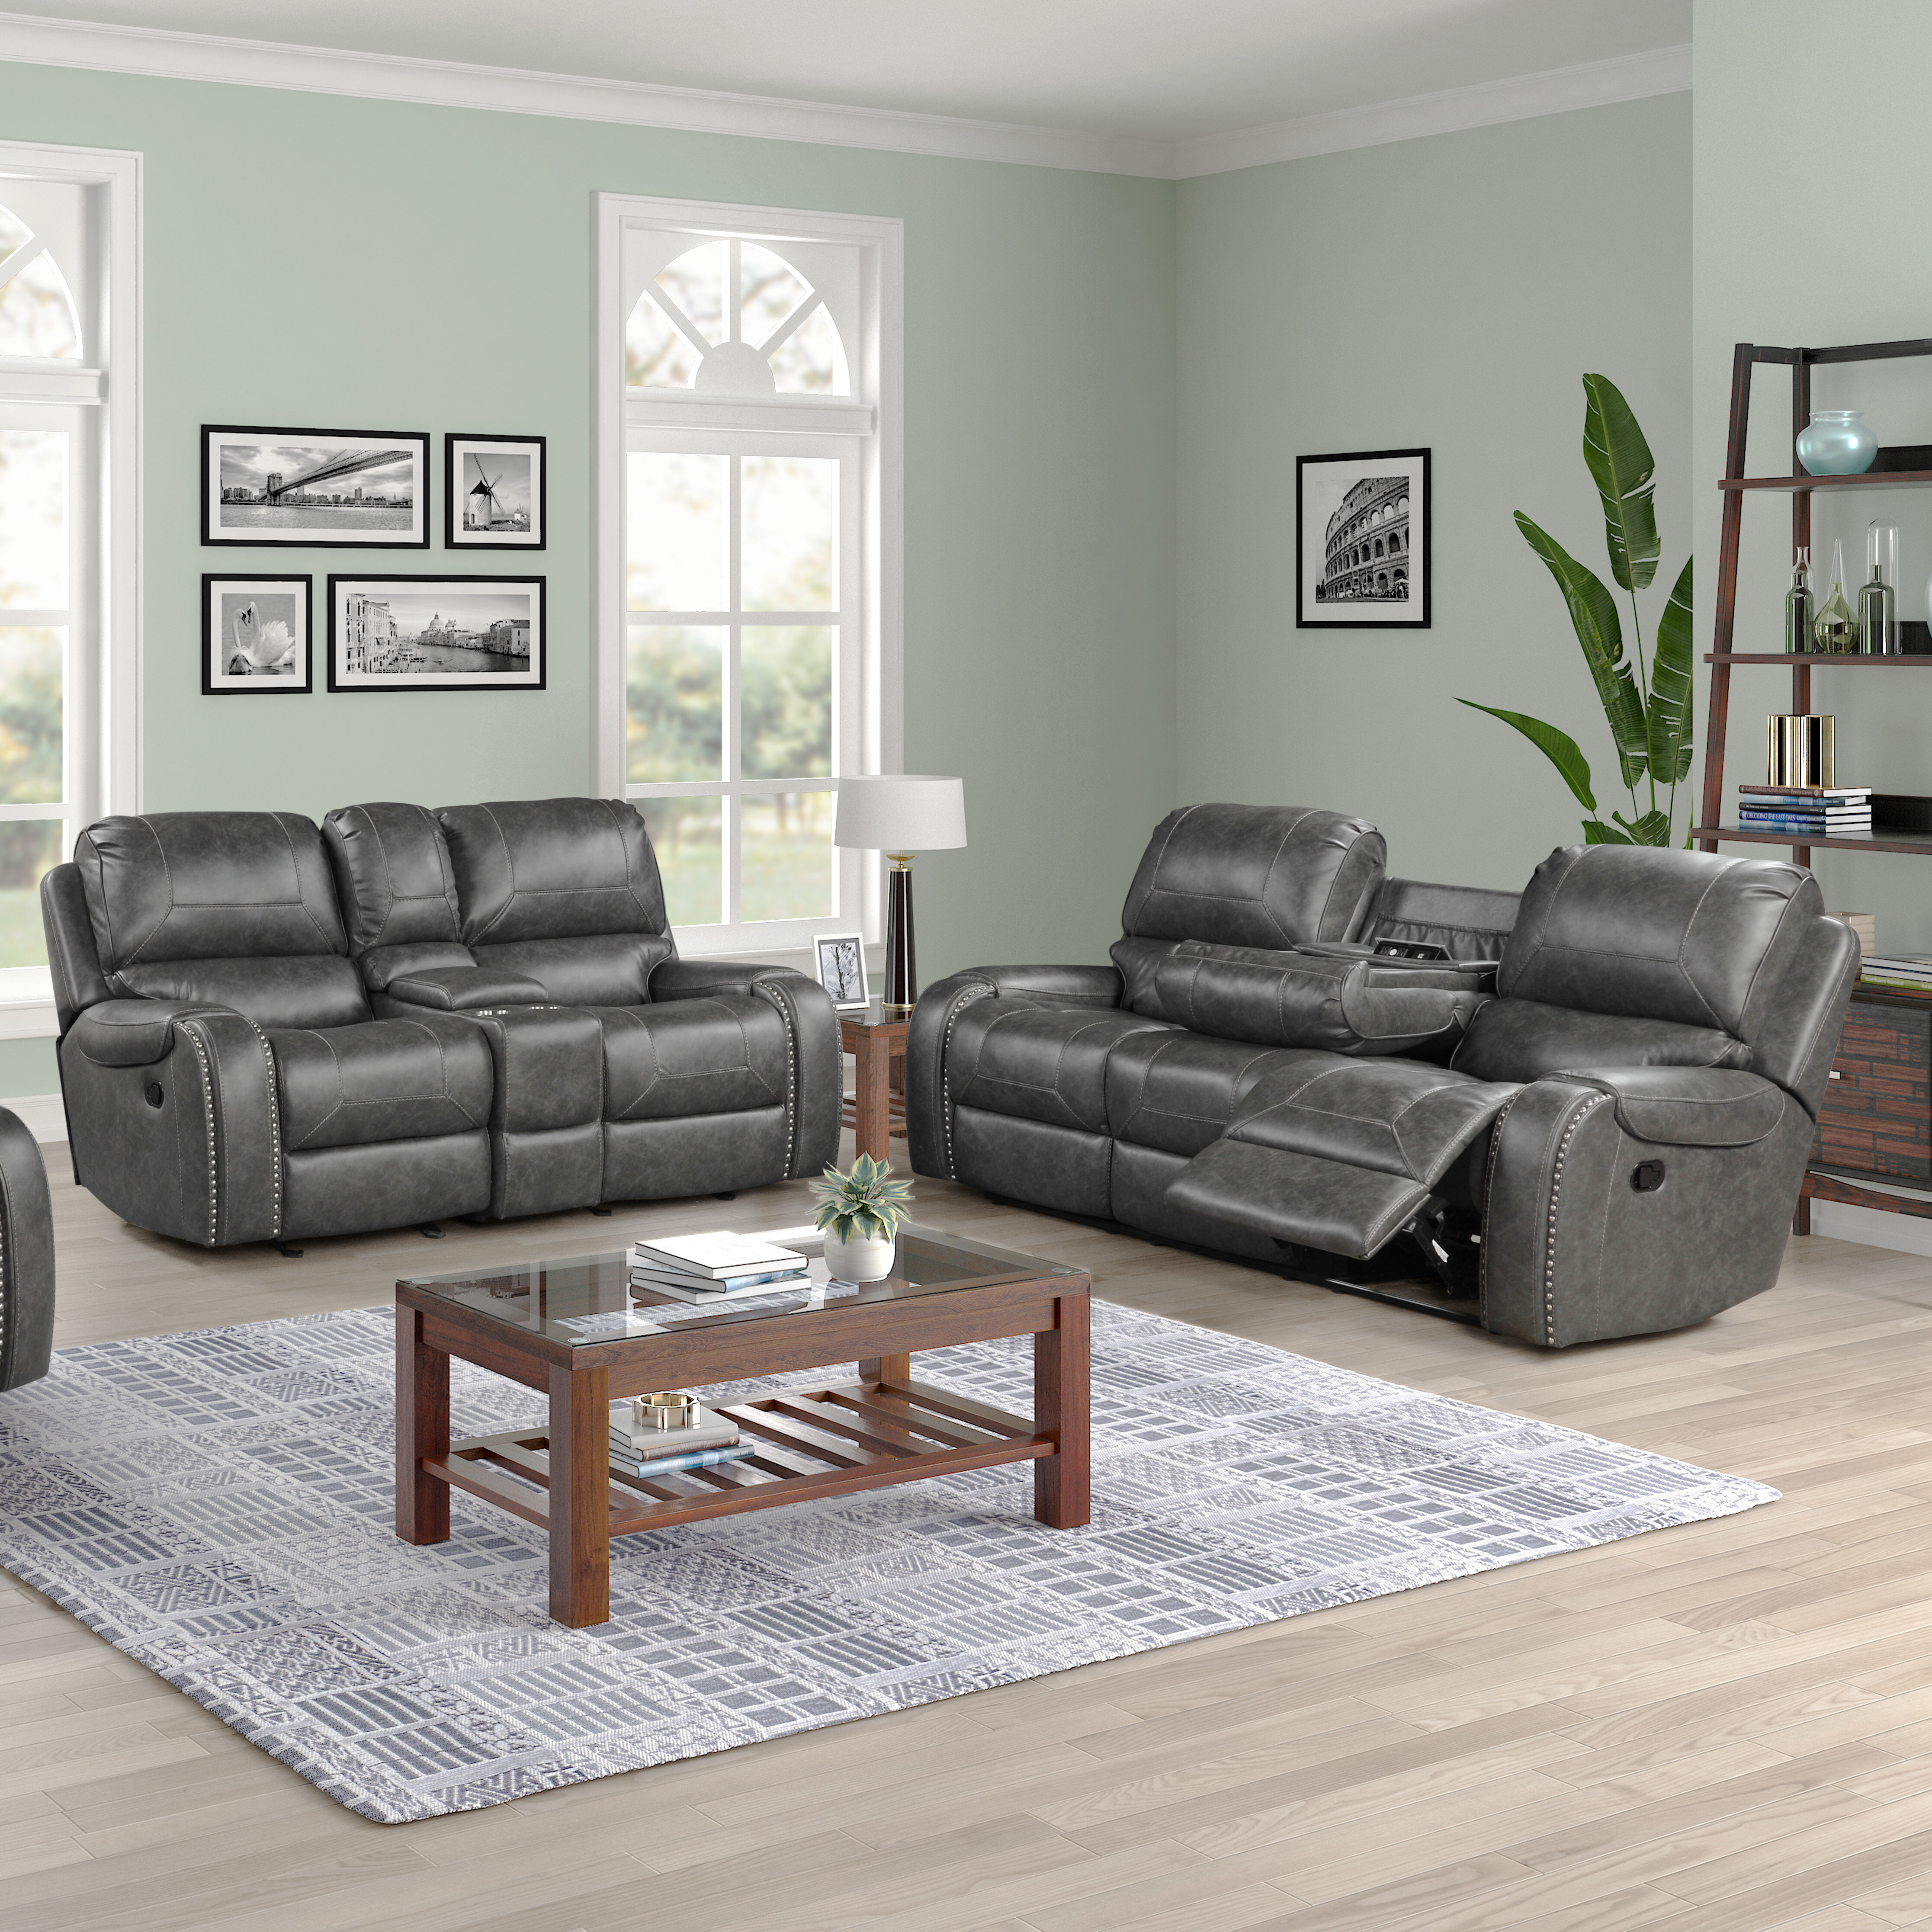 Millwood Pines Stampley 2 Piece Faux Leather Reclining Living Room Set Reviews Wayfair